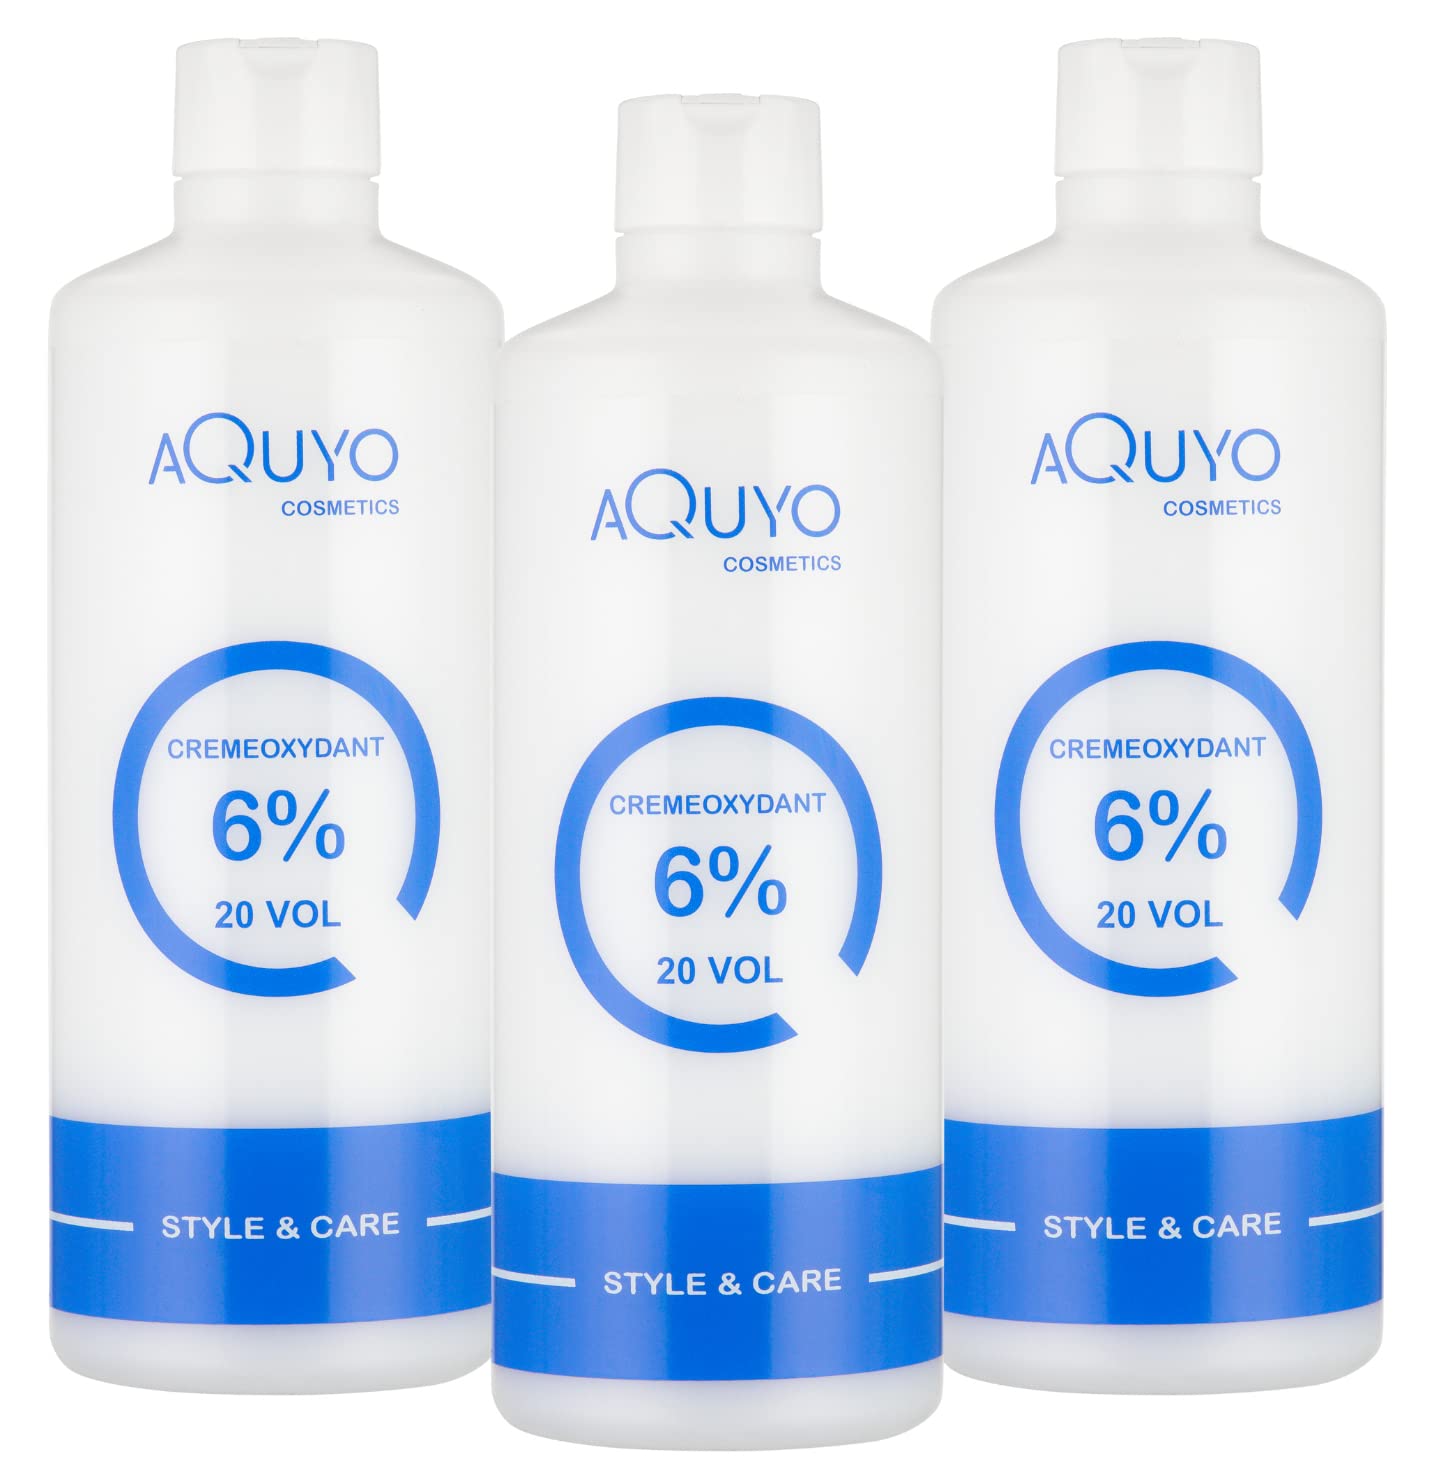 AQUYO Creme Oxydant Developer 6% 500 ml (20 Volumes) for Hair Colouring, Hair Dye or Bleaching (Pack of 3) | Oxidation Cream with Hydrogen Peroxide H2O2 | Oxidant is Free from Fragrances